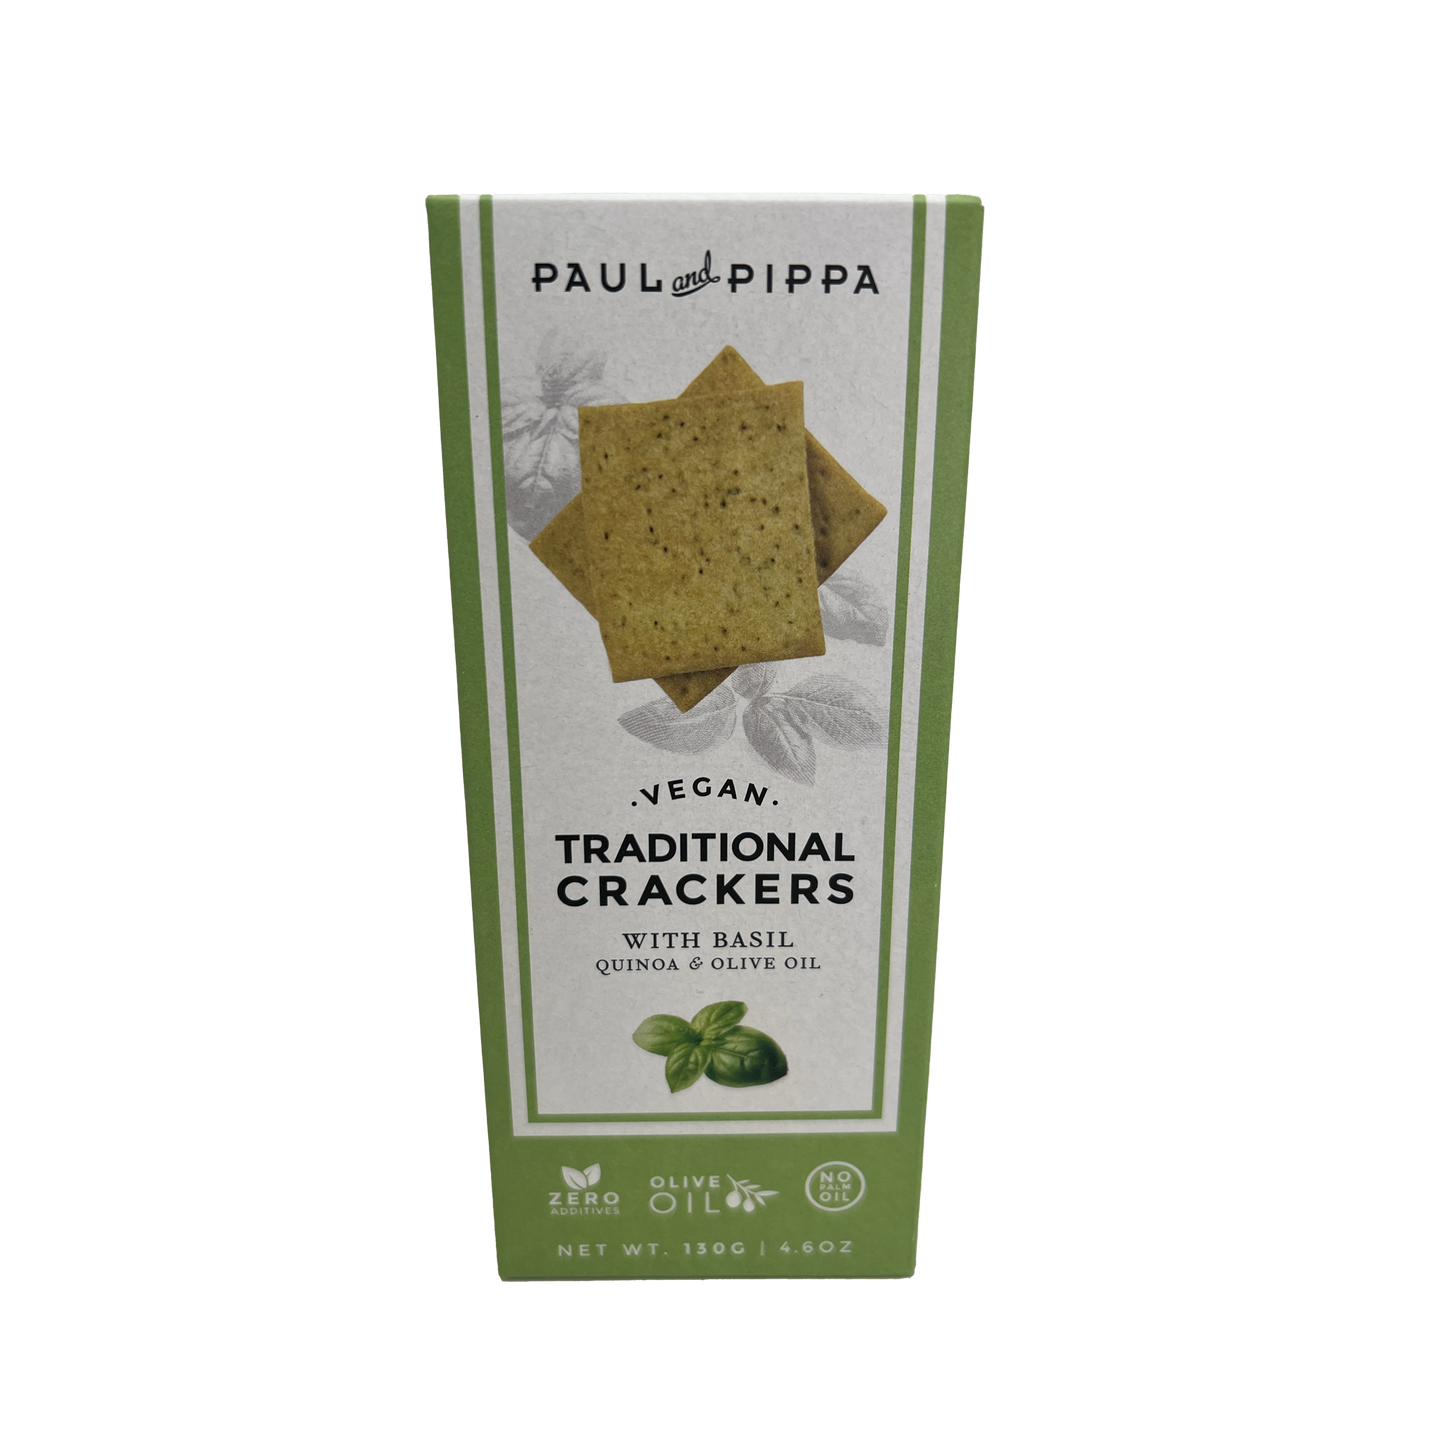 PAUL AND PIPPA Vegan Crackers with Basil